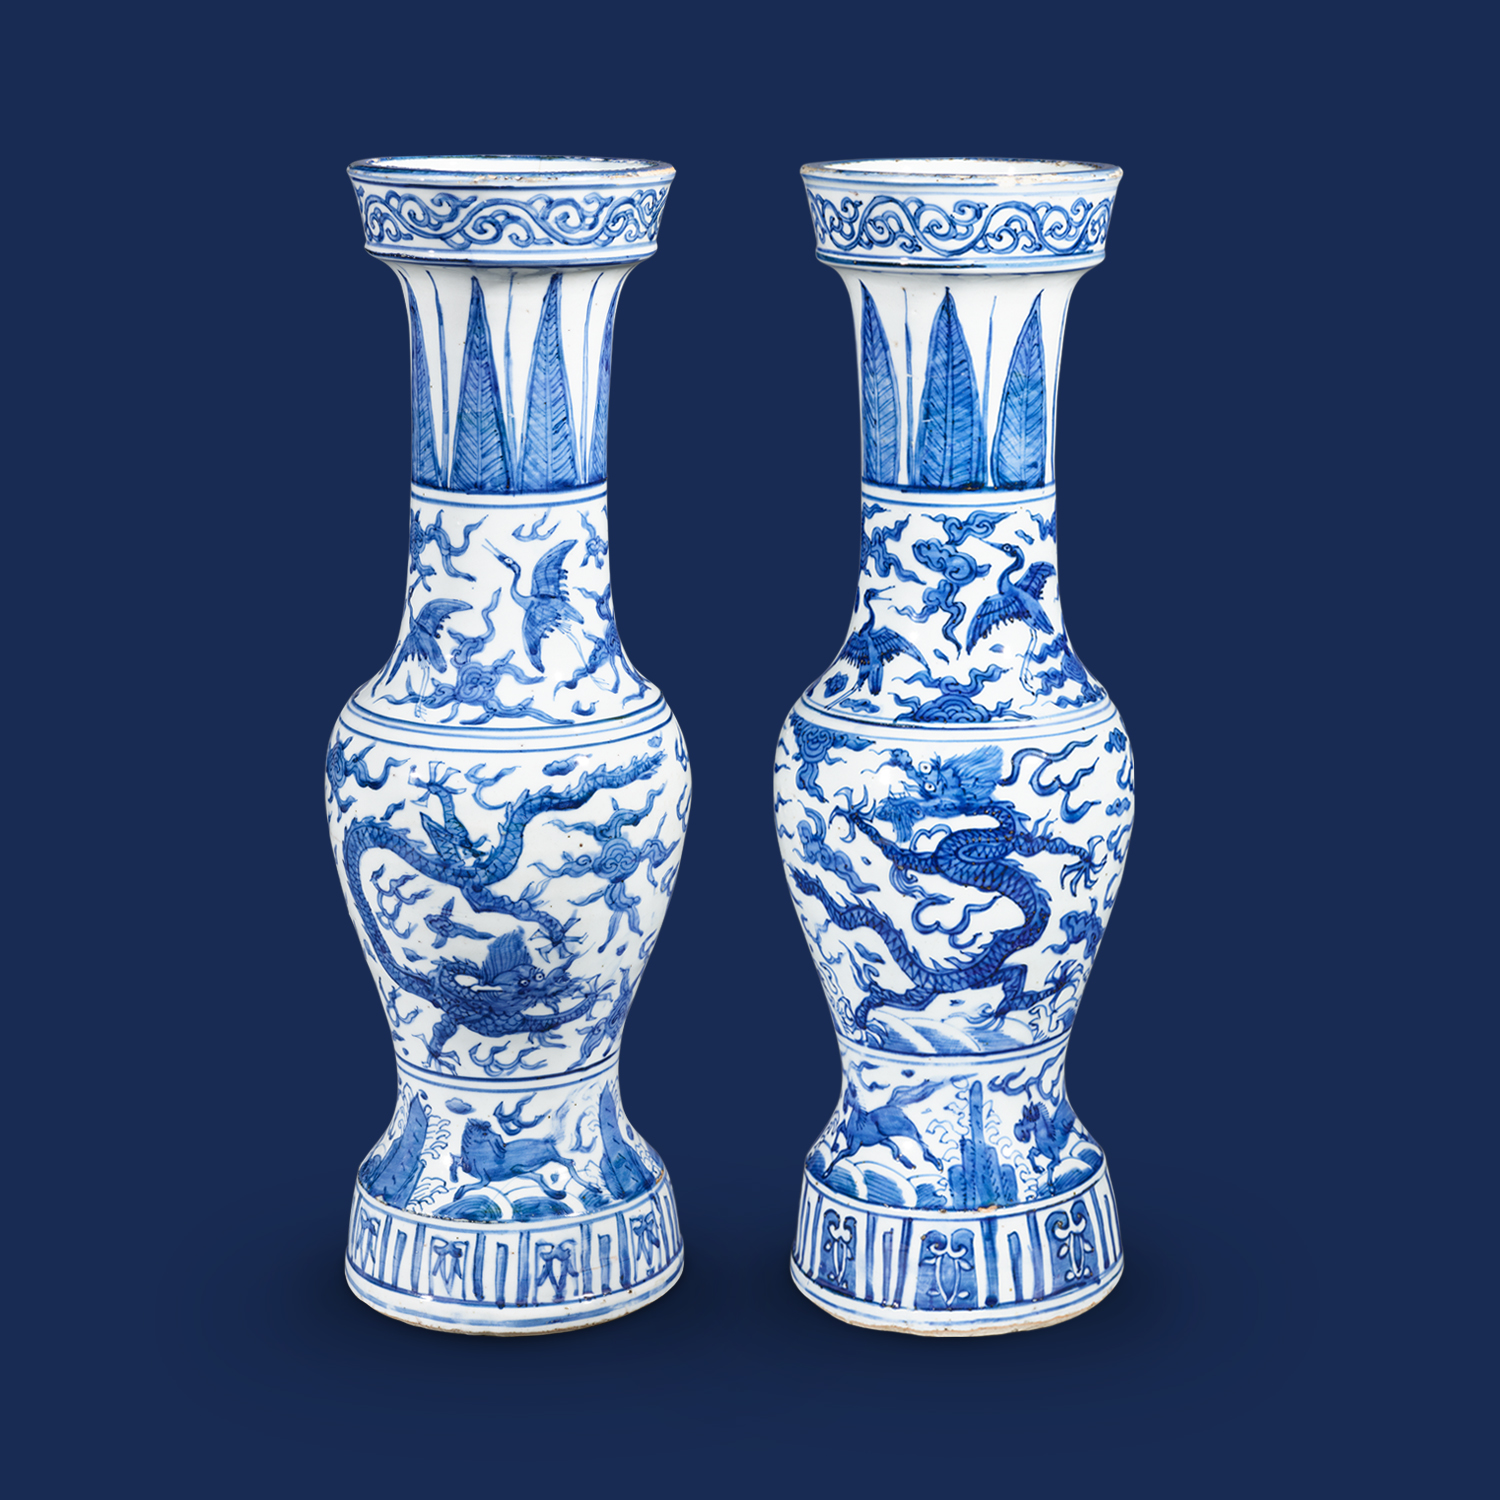 Pair of temple vases with dragons and flaming pearls amidst clouds design in underglaze blue